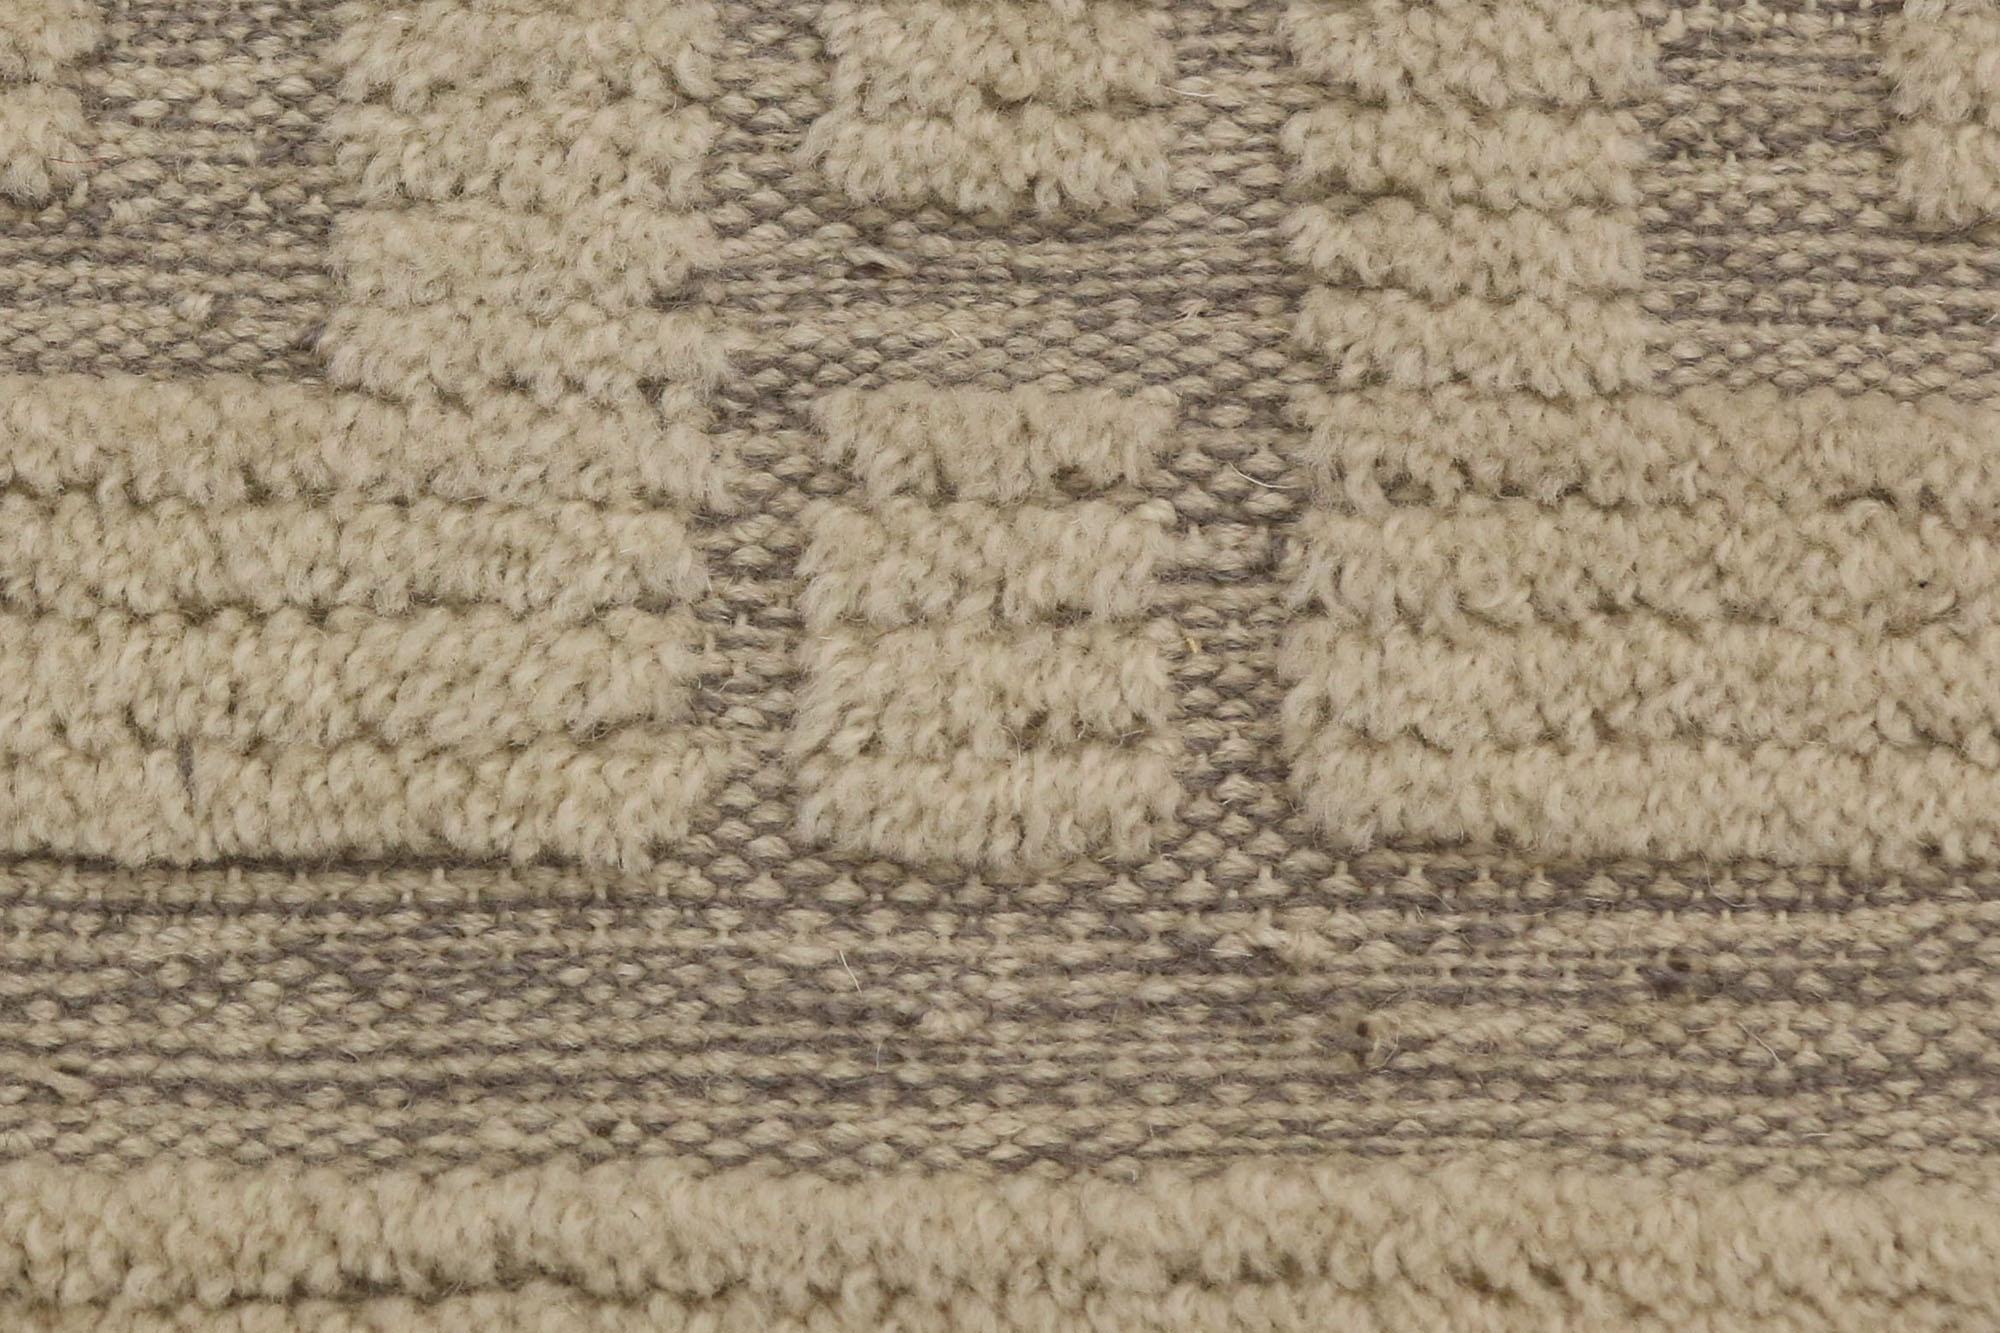 Organic Modern Textured High-Low Rug Inspired by Sigvard Bernadotte In New Condition For Sale In Dallas, TX